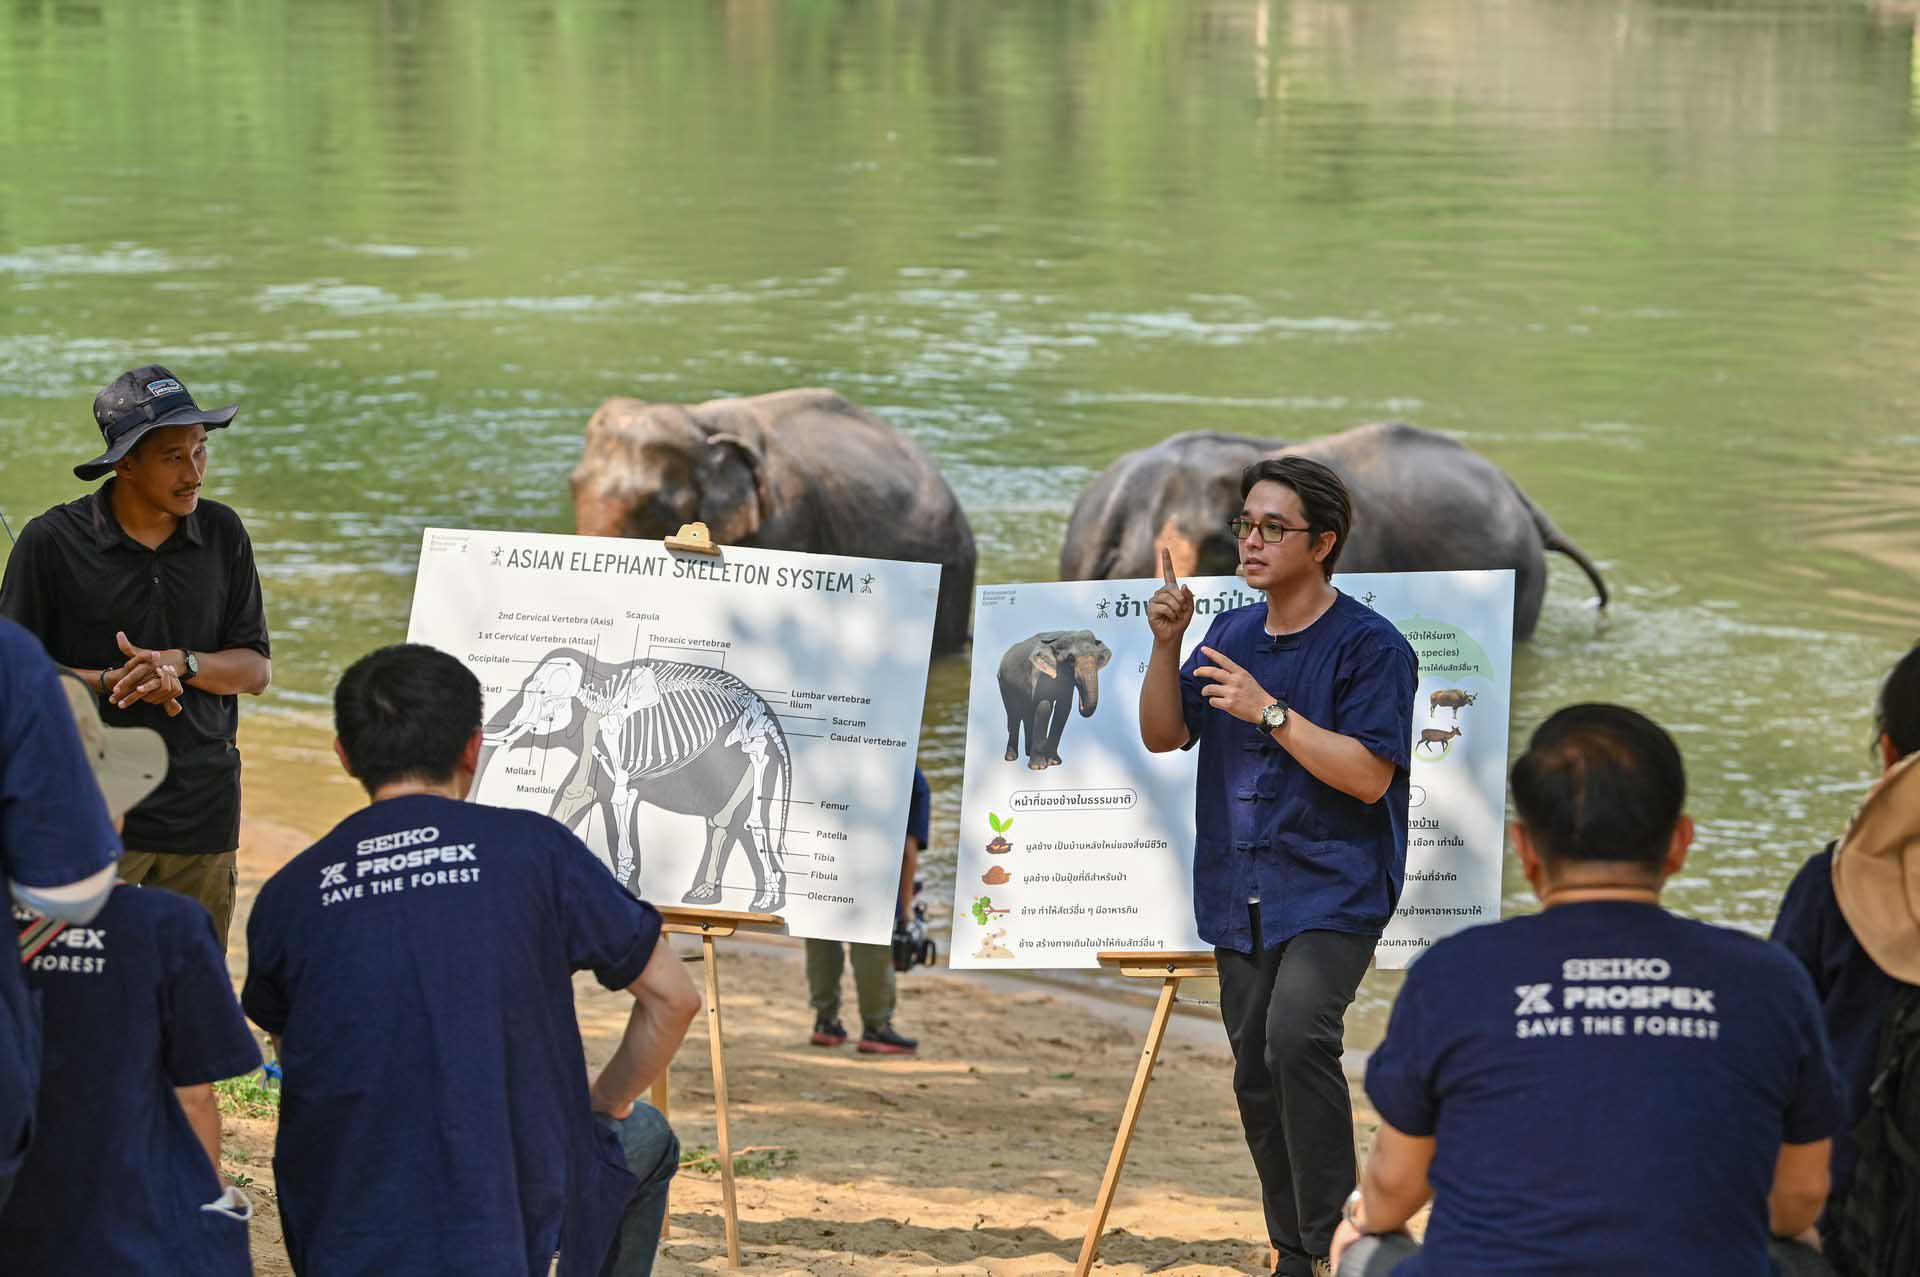 Seiko ‘Save the Forest to Save Our Elephant’